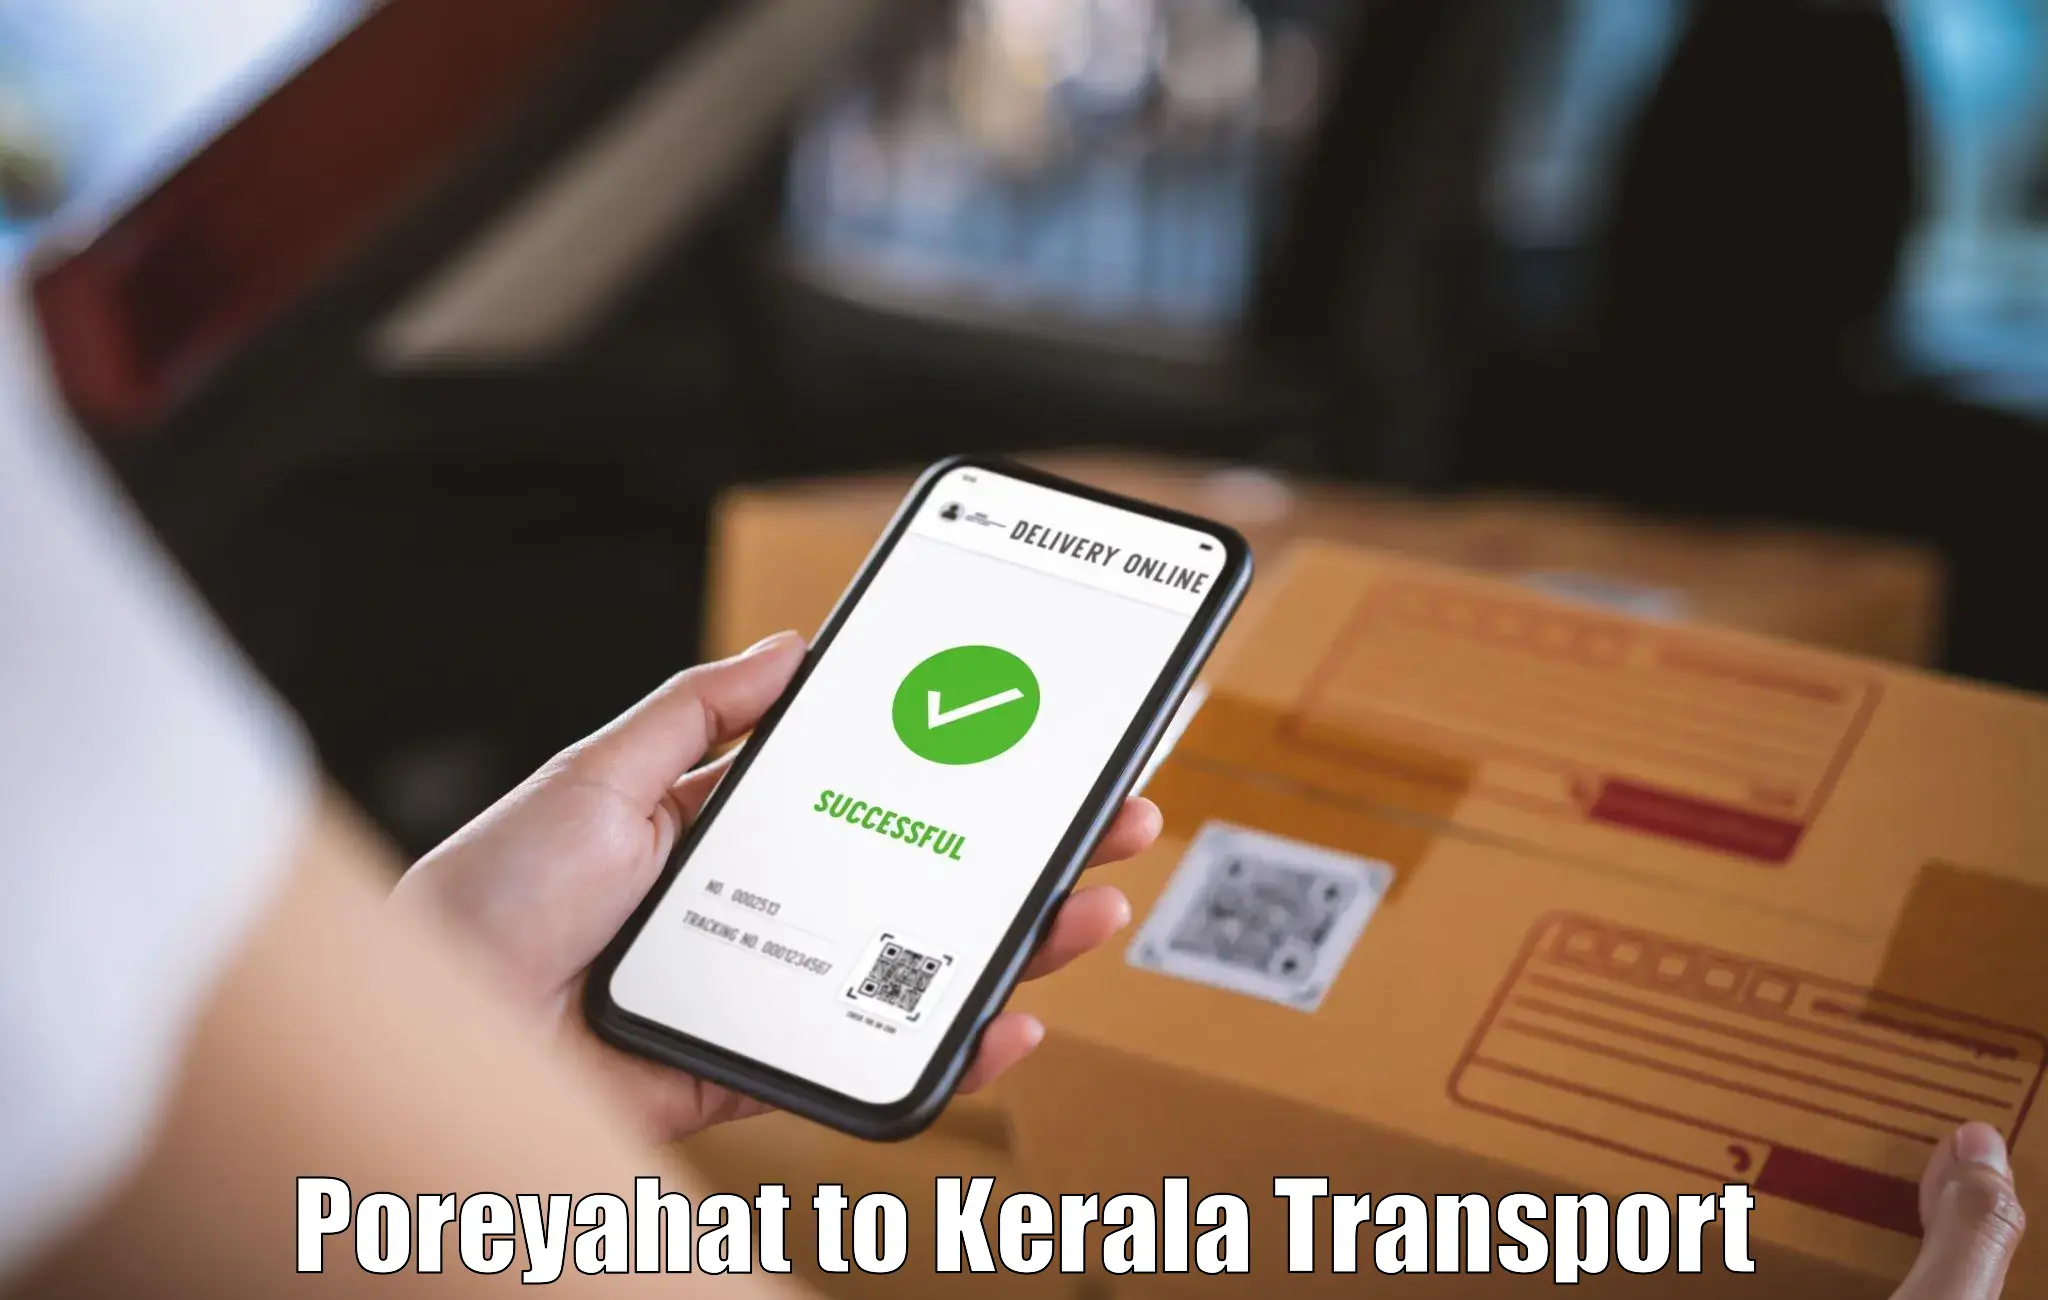 Container transport service Poreyahat to Ernakulam